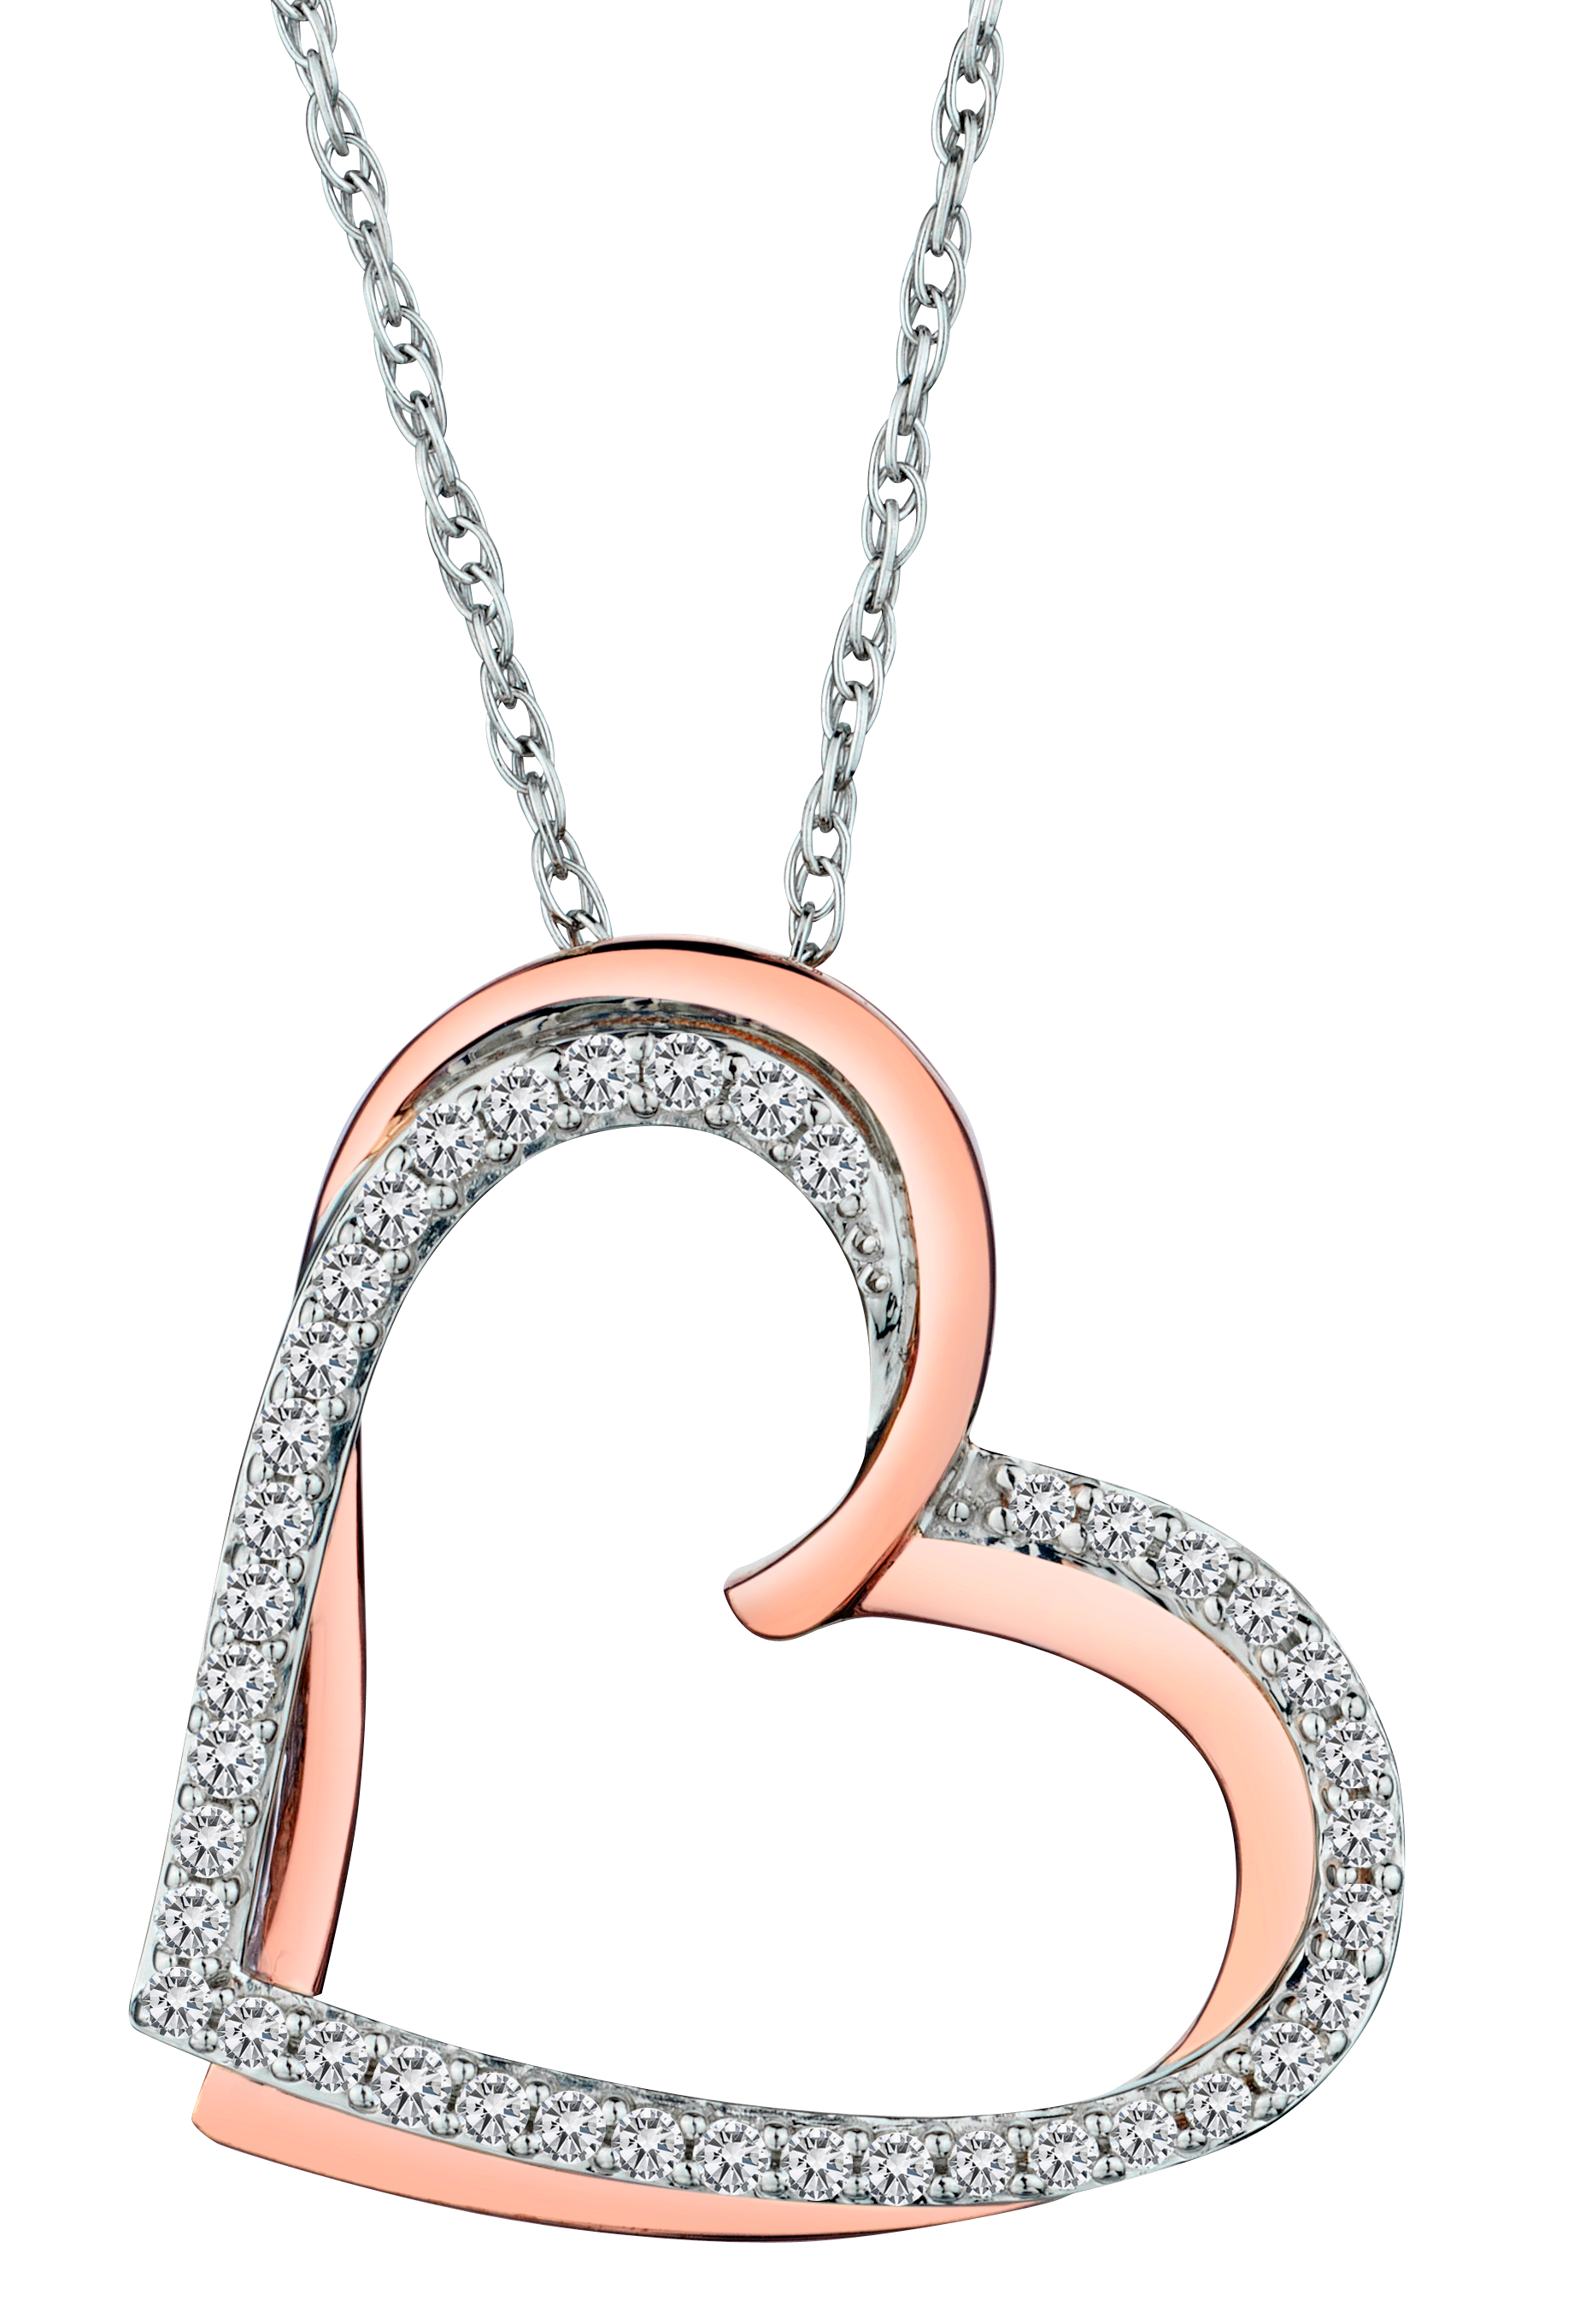 .26 Carat of Lab Grown Diamonds "Entwined" Heart Pendant, Silver.....................NOW